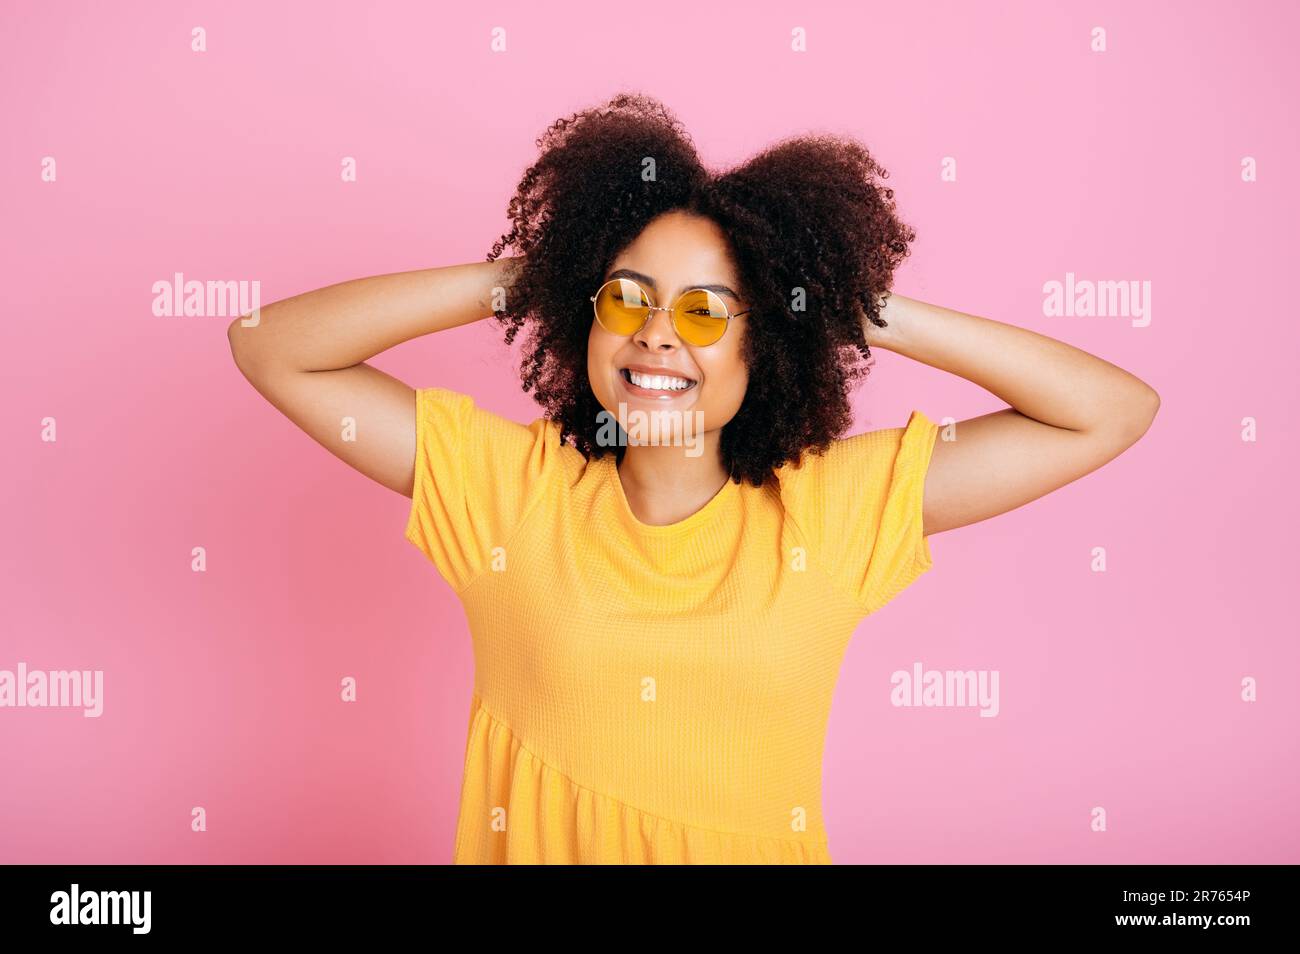 Cheerful excited brazilian or african american curly young woman in trendy orange glasses and sundress, having fun, posing, holding hands on hair, looking at camera, smiling, isolated pink background Stock Photo